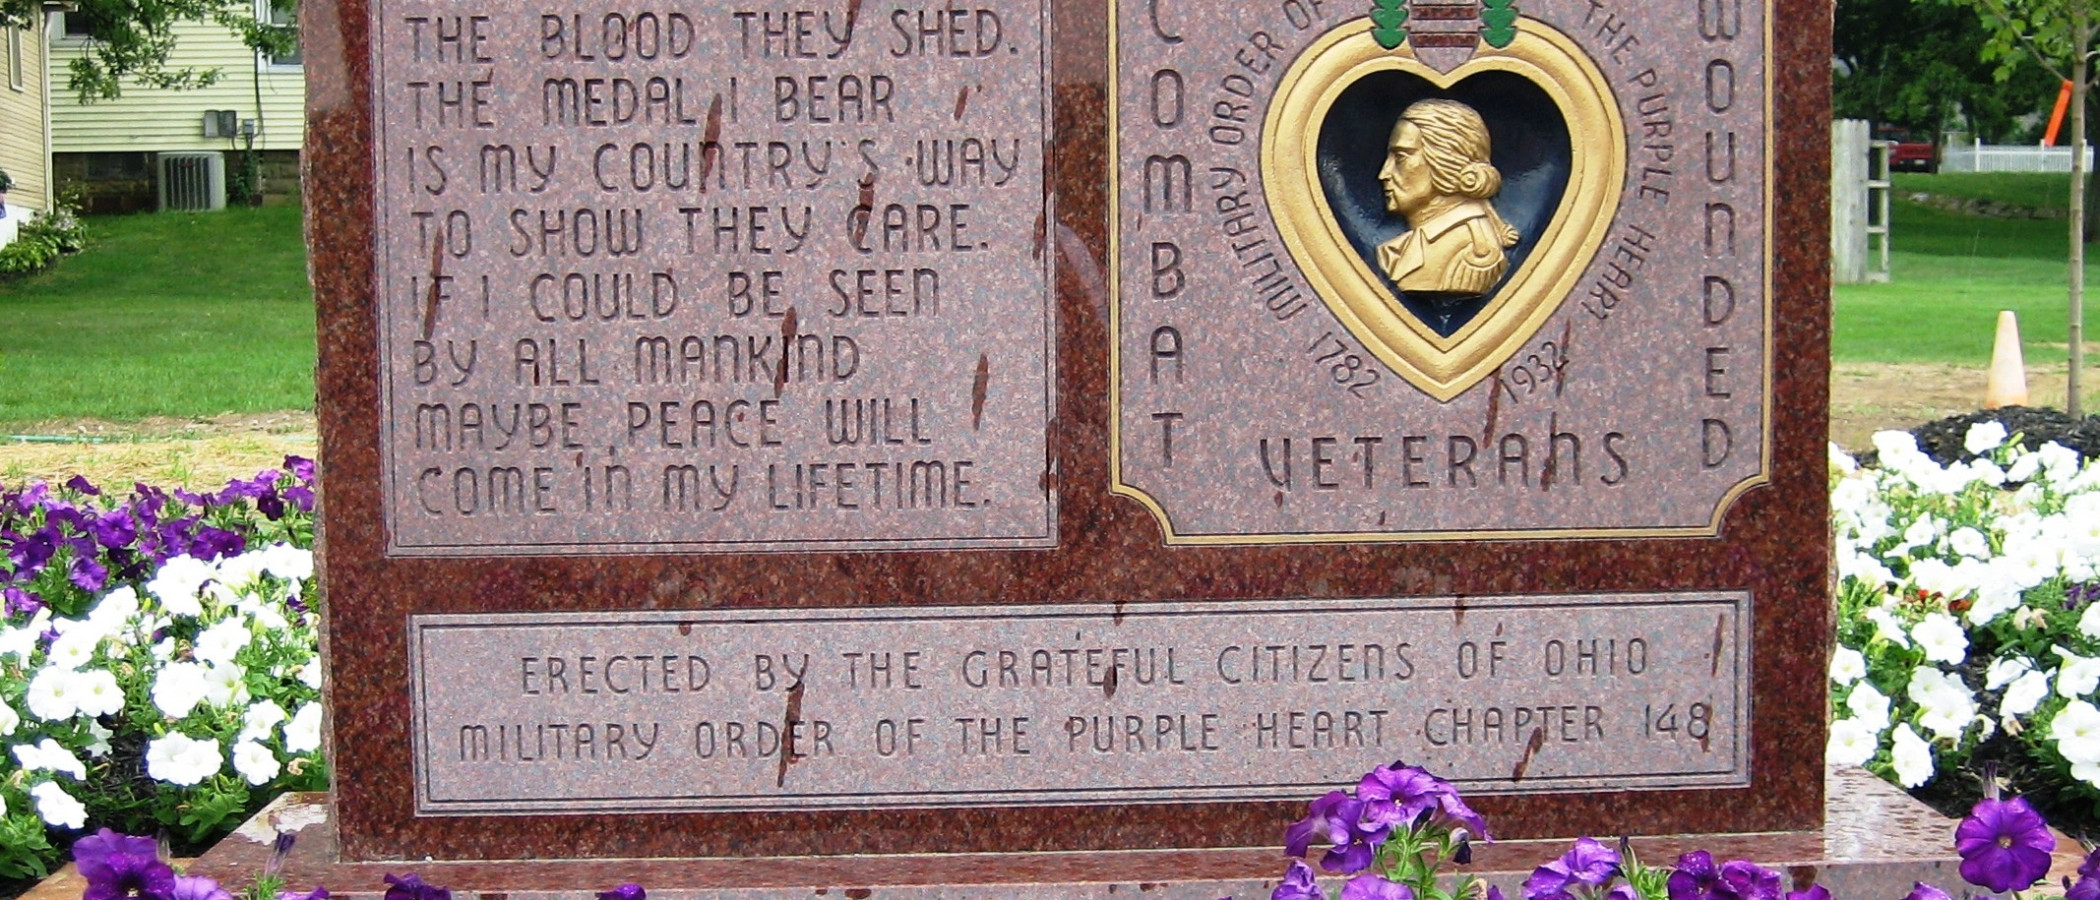 Wounded in Combat Monument